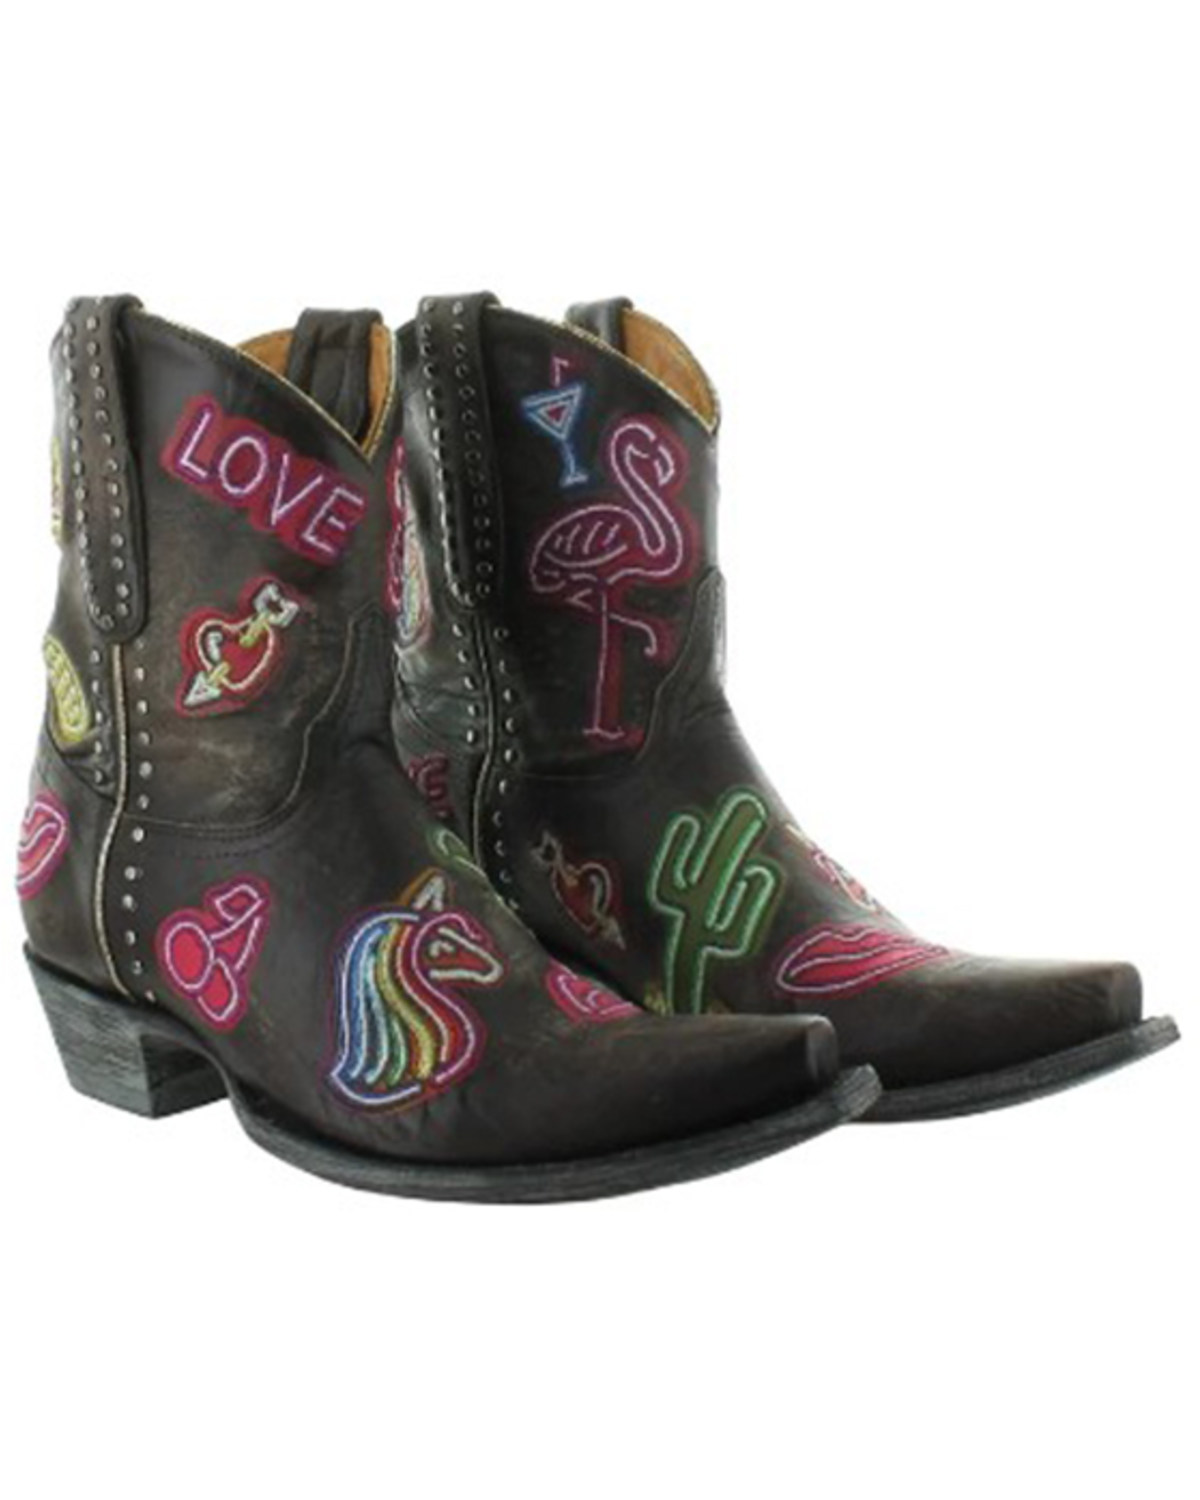 Old Gringo Women's Jackpot Short Embroidered & Studded Western Leather Booties - Snip Toe